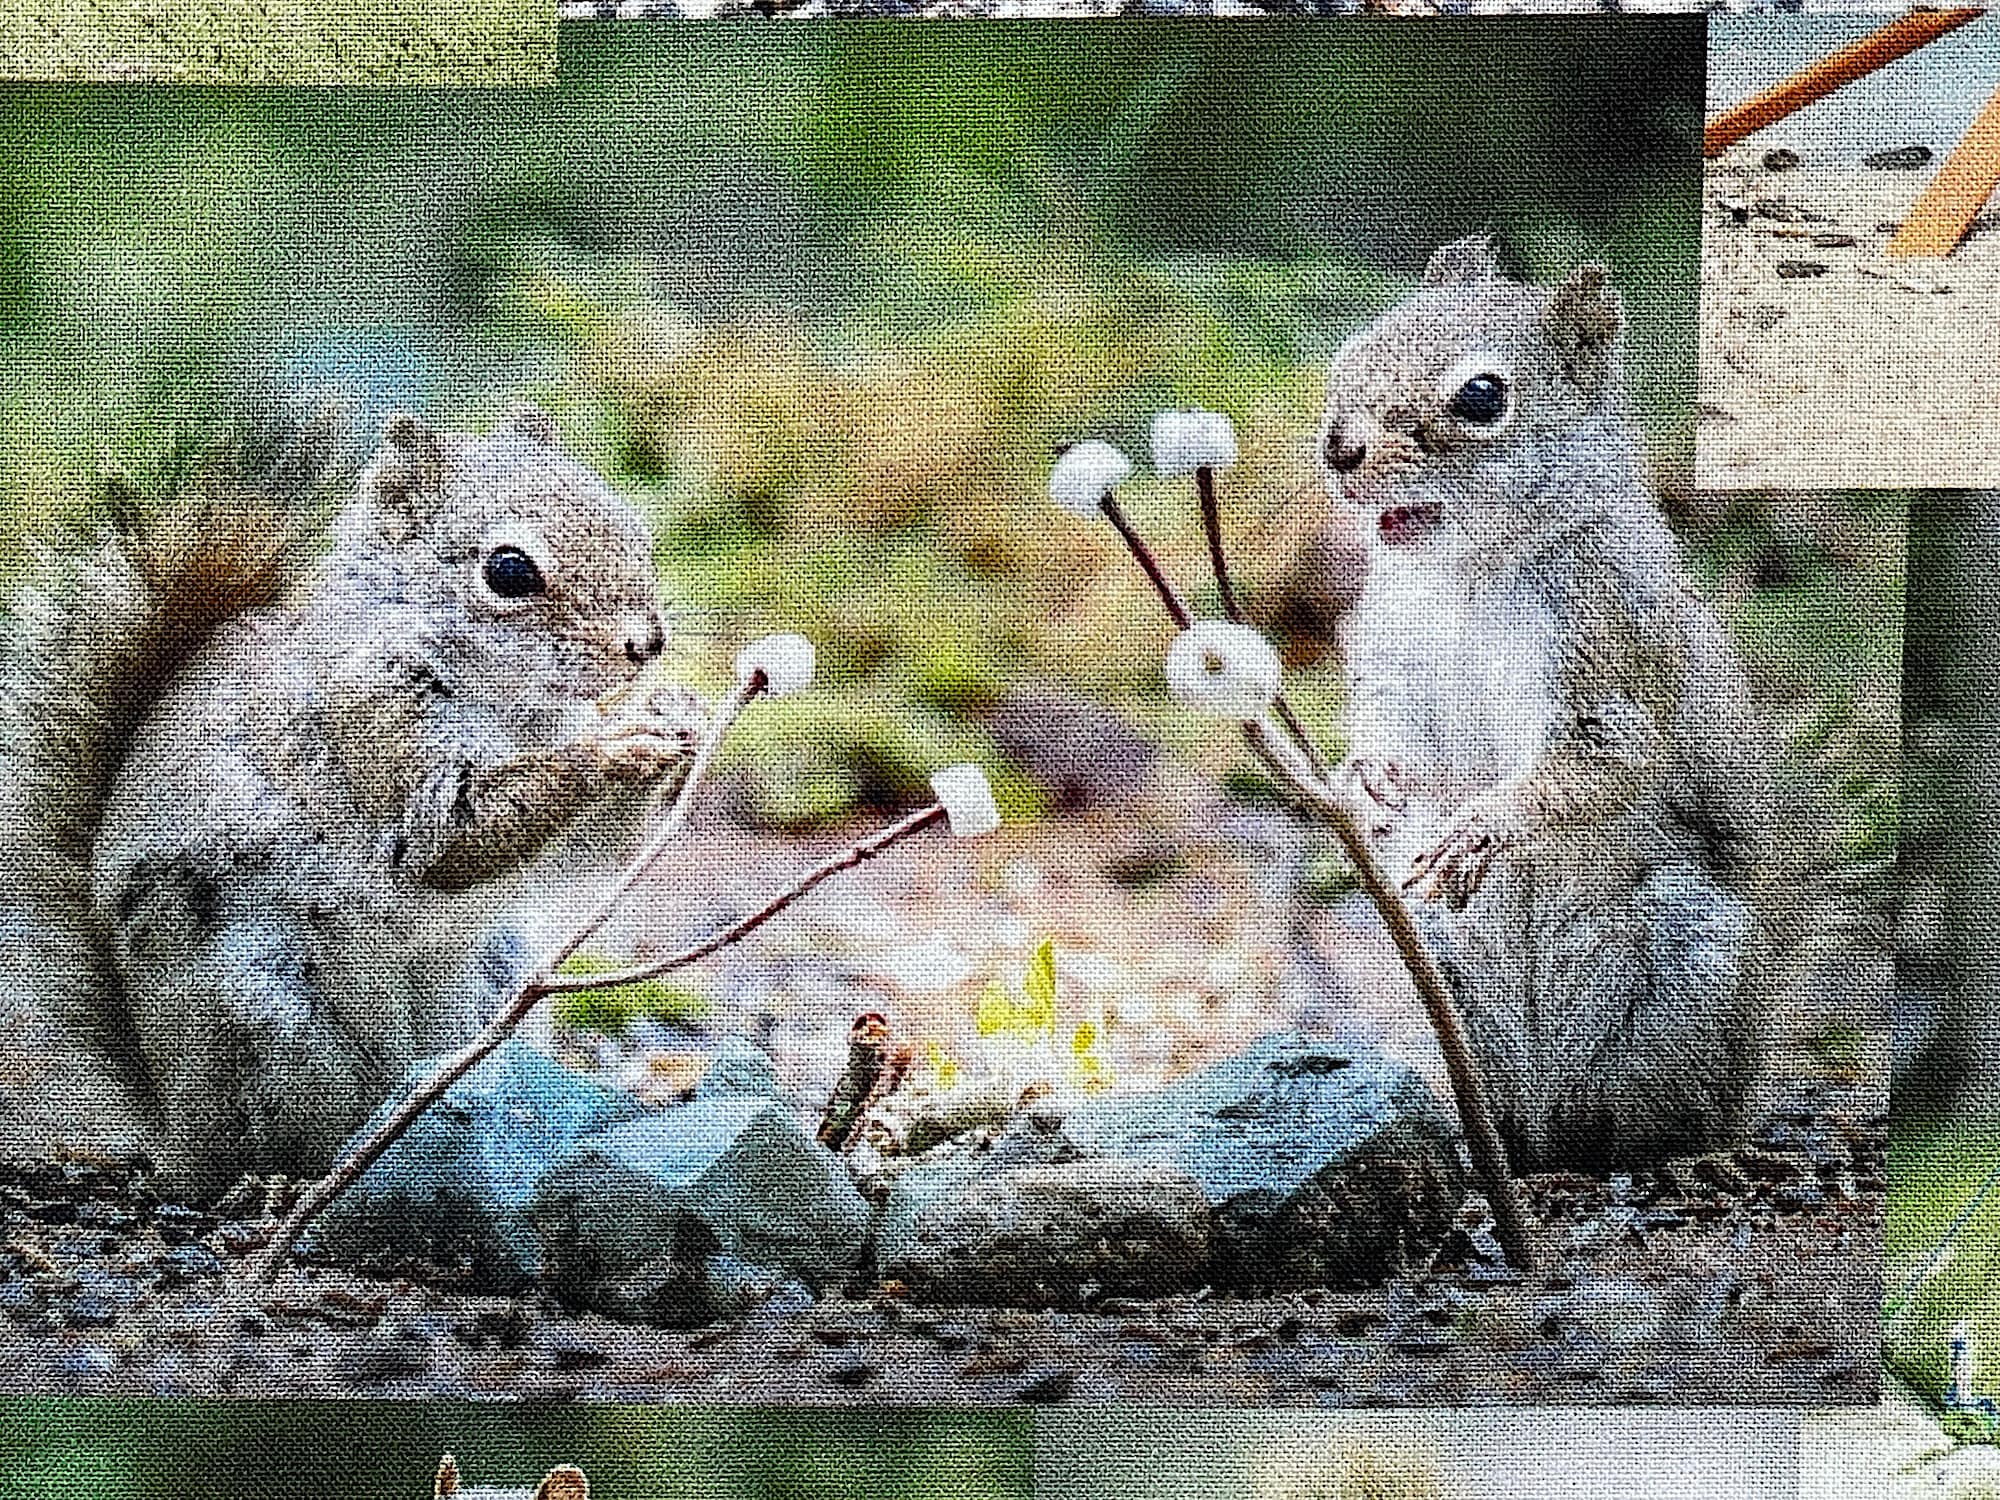 Two squirrels roasting marshmallows.